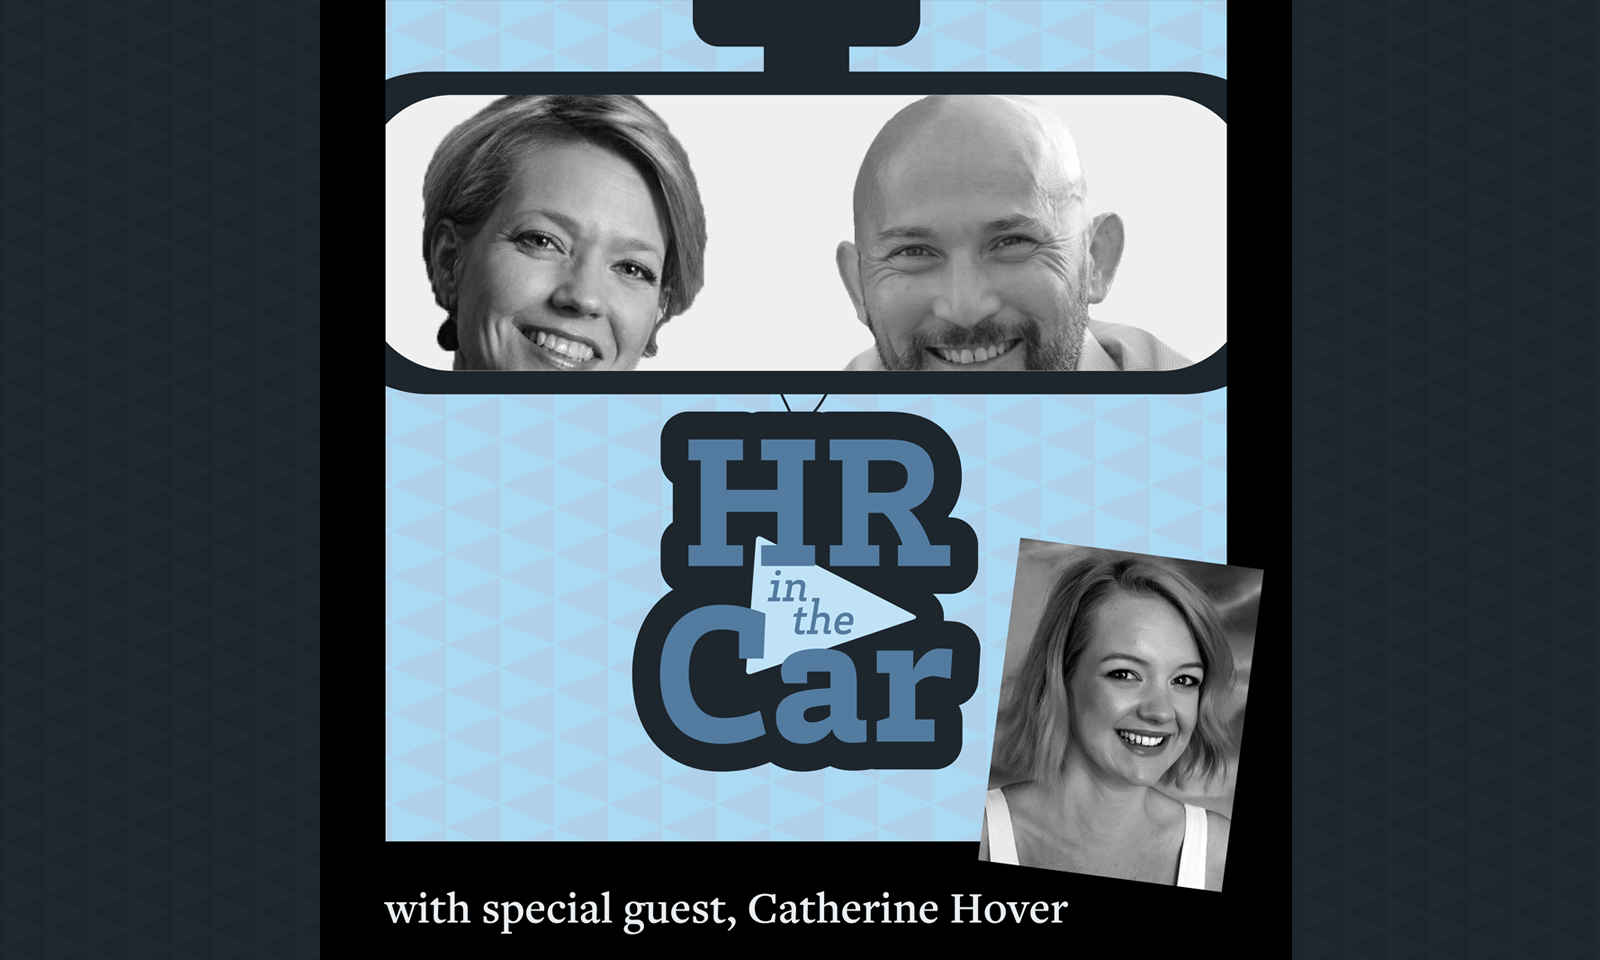 HR in the Car - Episode 3: "Need Energy? Catherine May Have Some to Spare…"